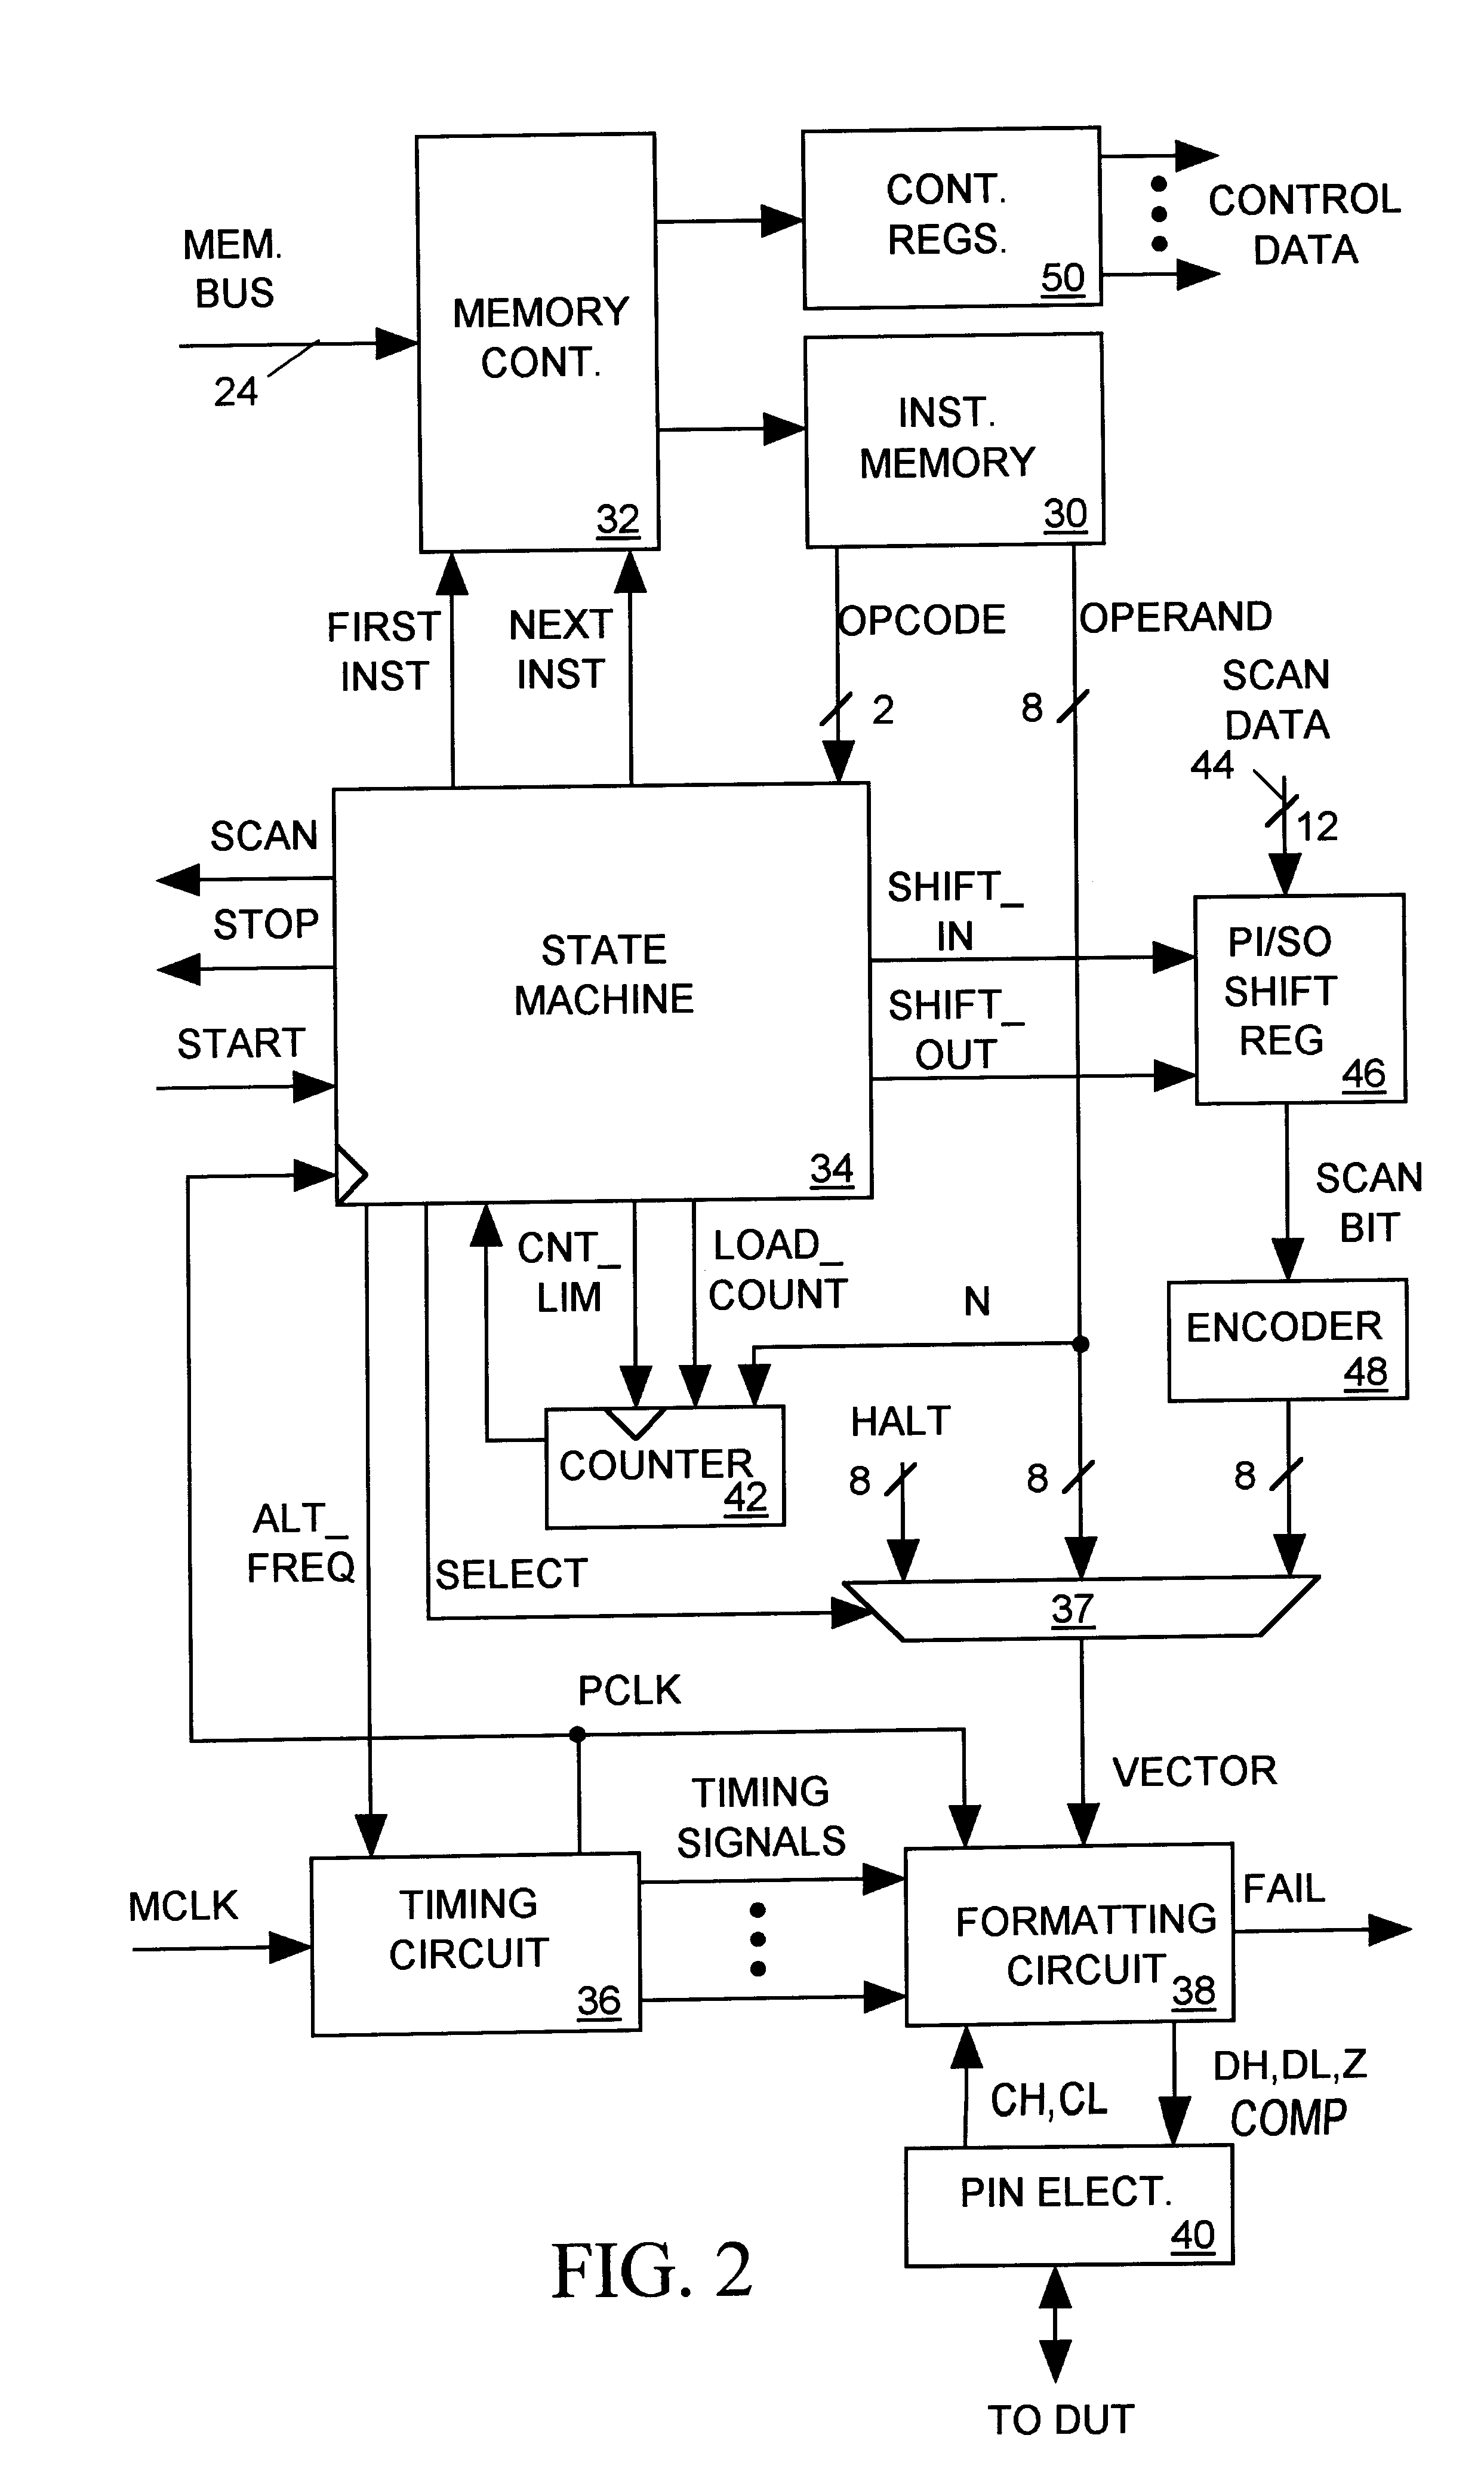 Integrated circuit tester with disk-based data streaming